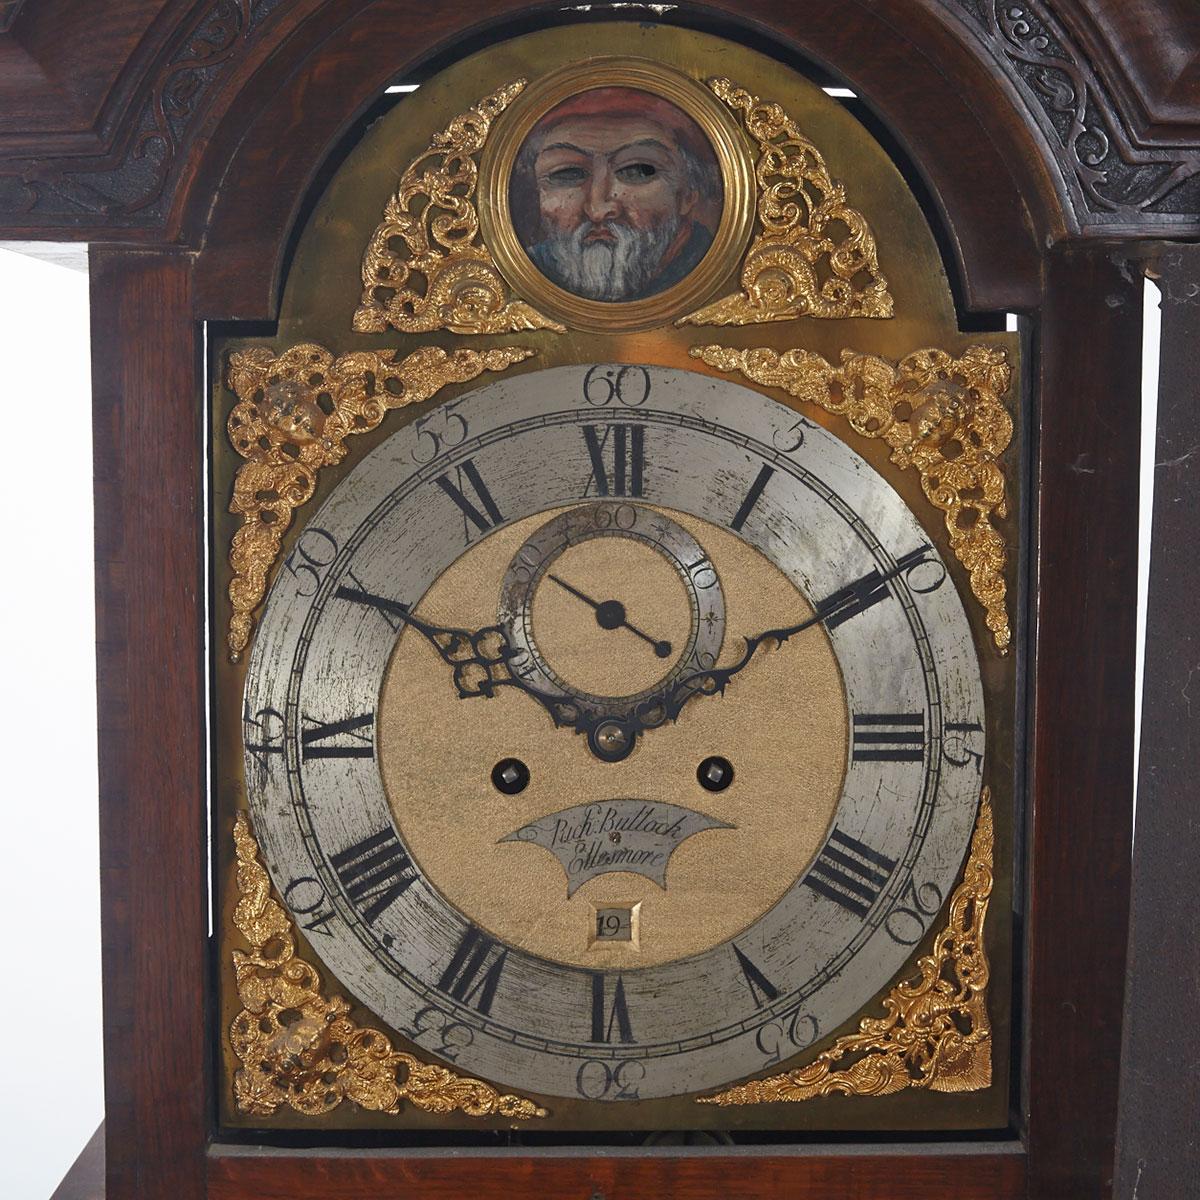 English Oak Tall Case Clock with Animated Dial, Richard Bullock, Ellesmore, early 19th century